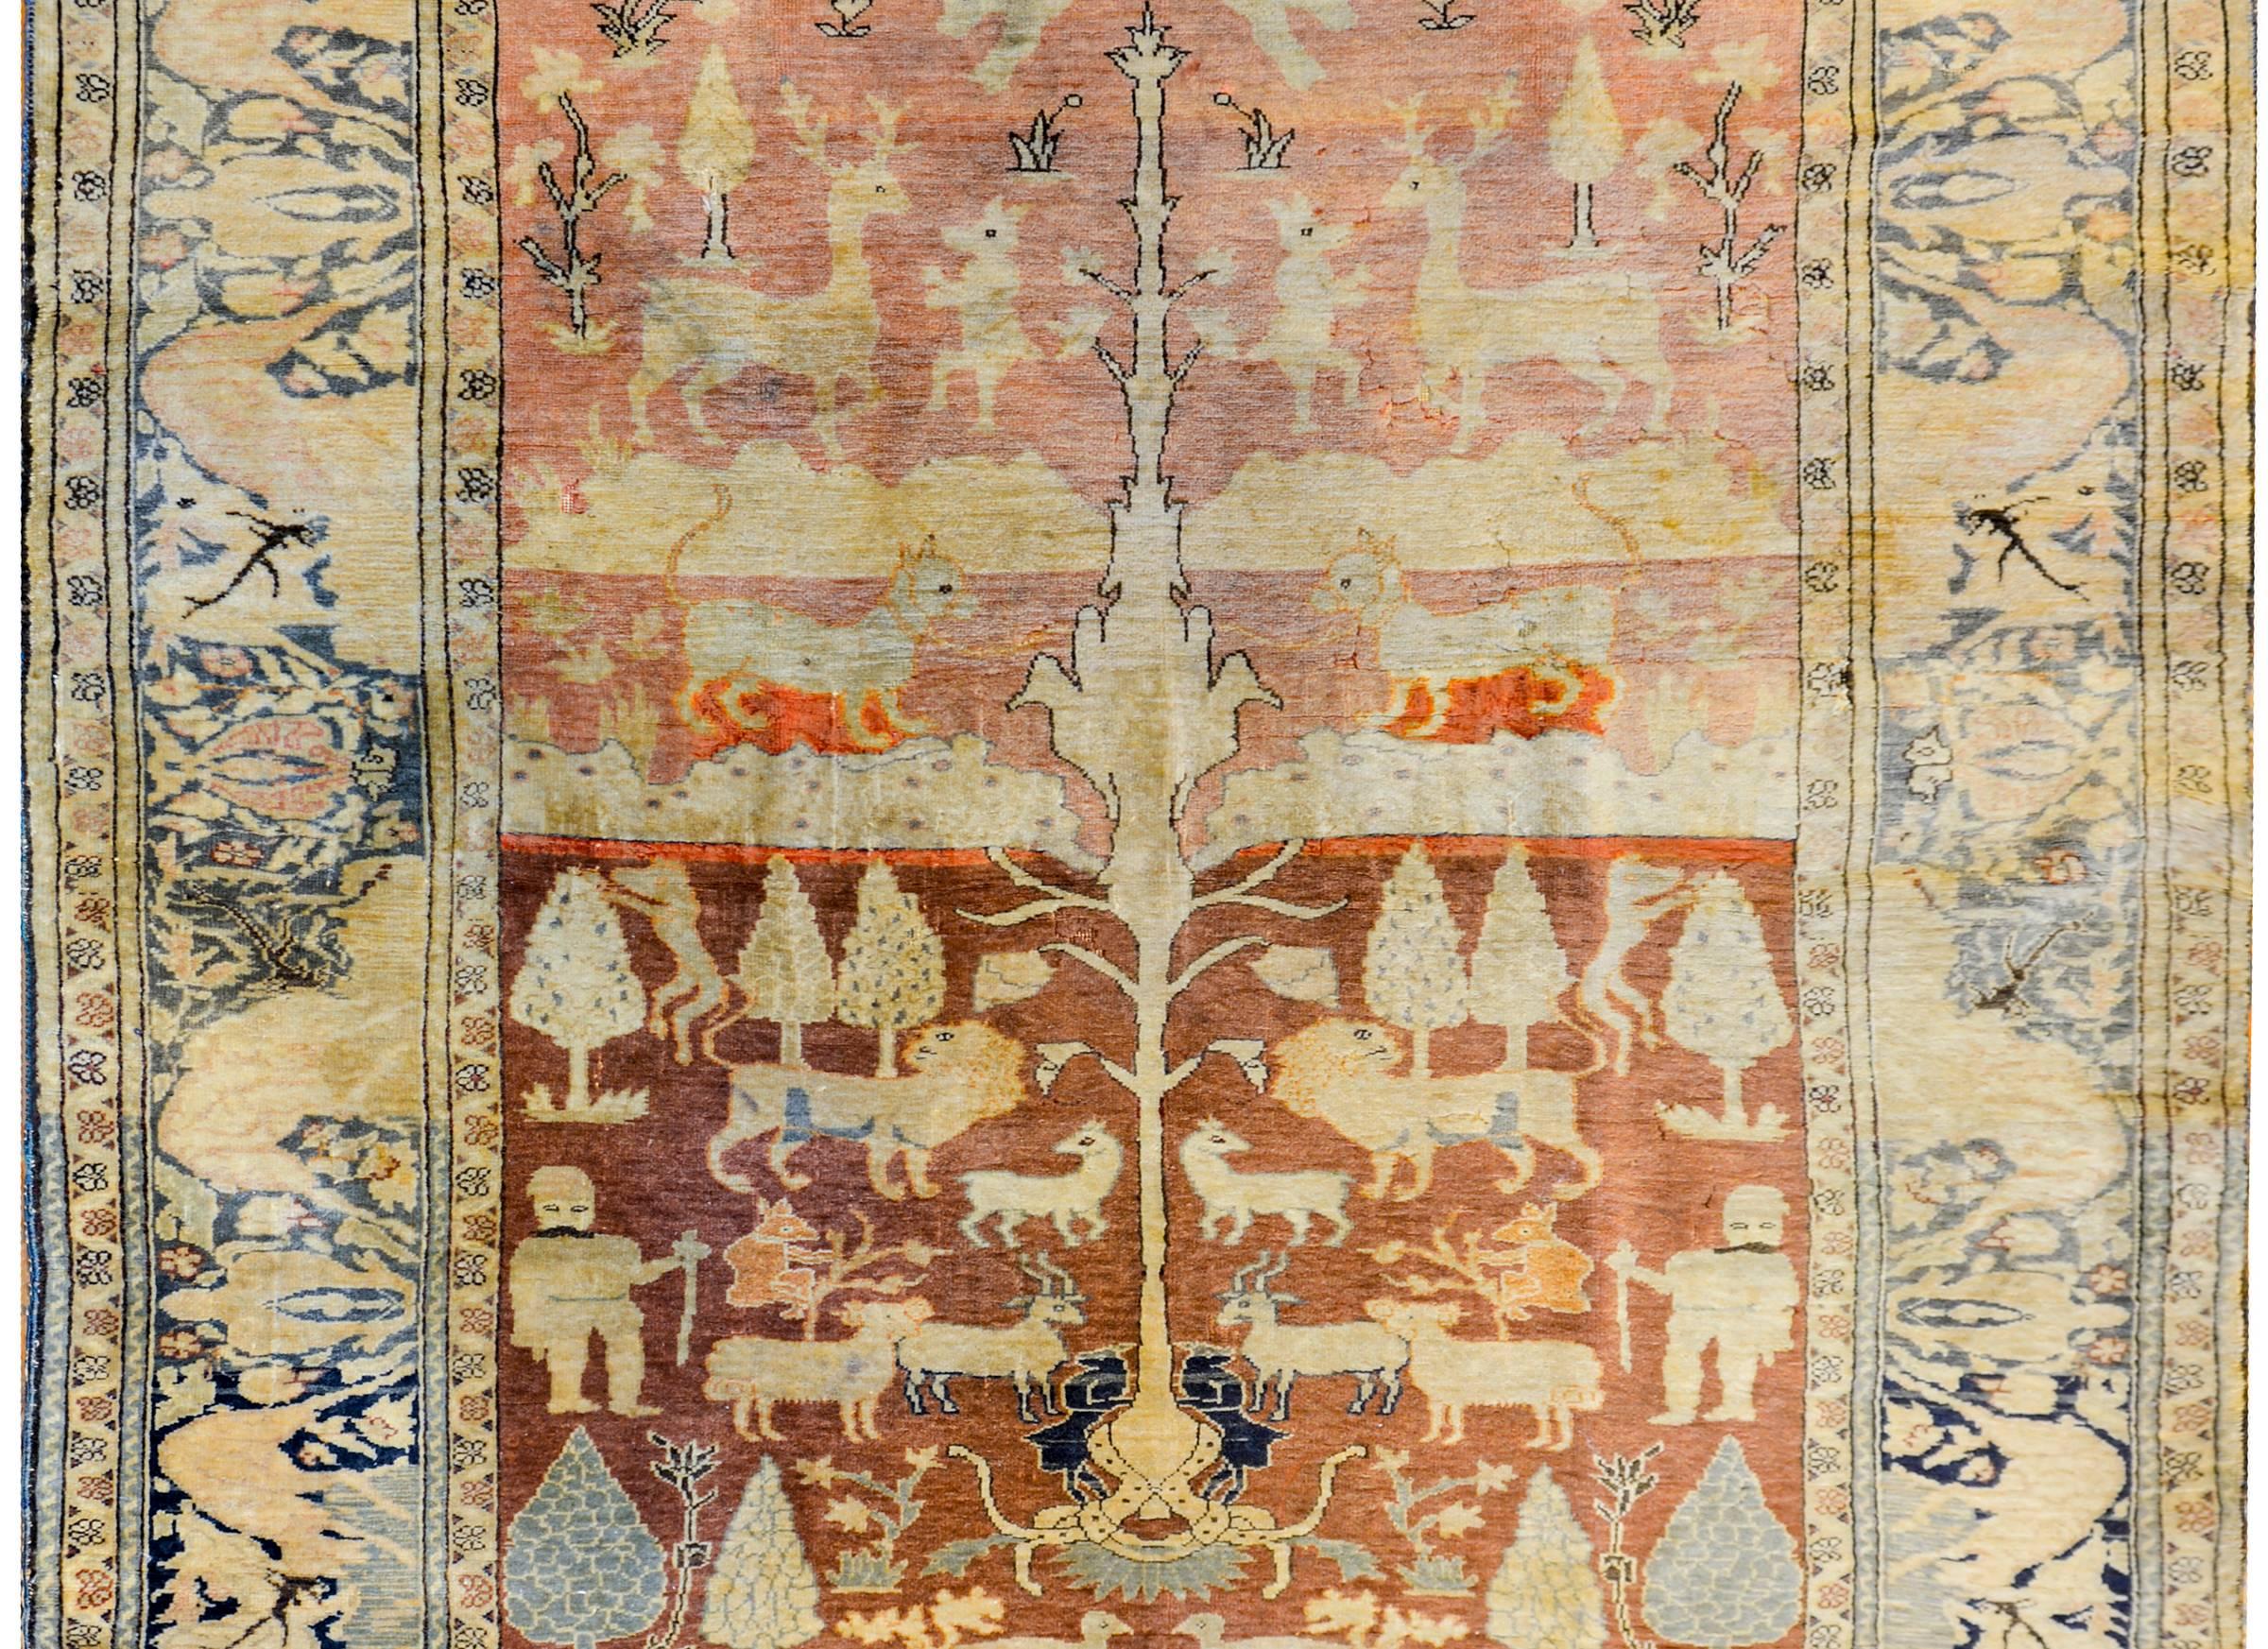 A wonderful early 20th century Turkish Anatolian pictorial rug with a central tree-of-life in a field full or myriad animals including peacocks, lions, goats, dogs, and monkeys, on a sophisticated rusty orange background. The border is also